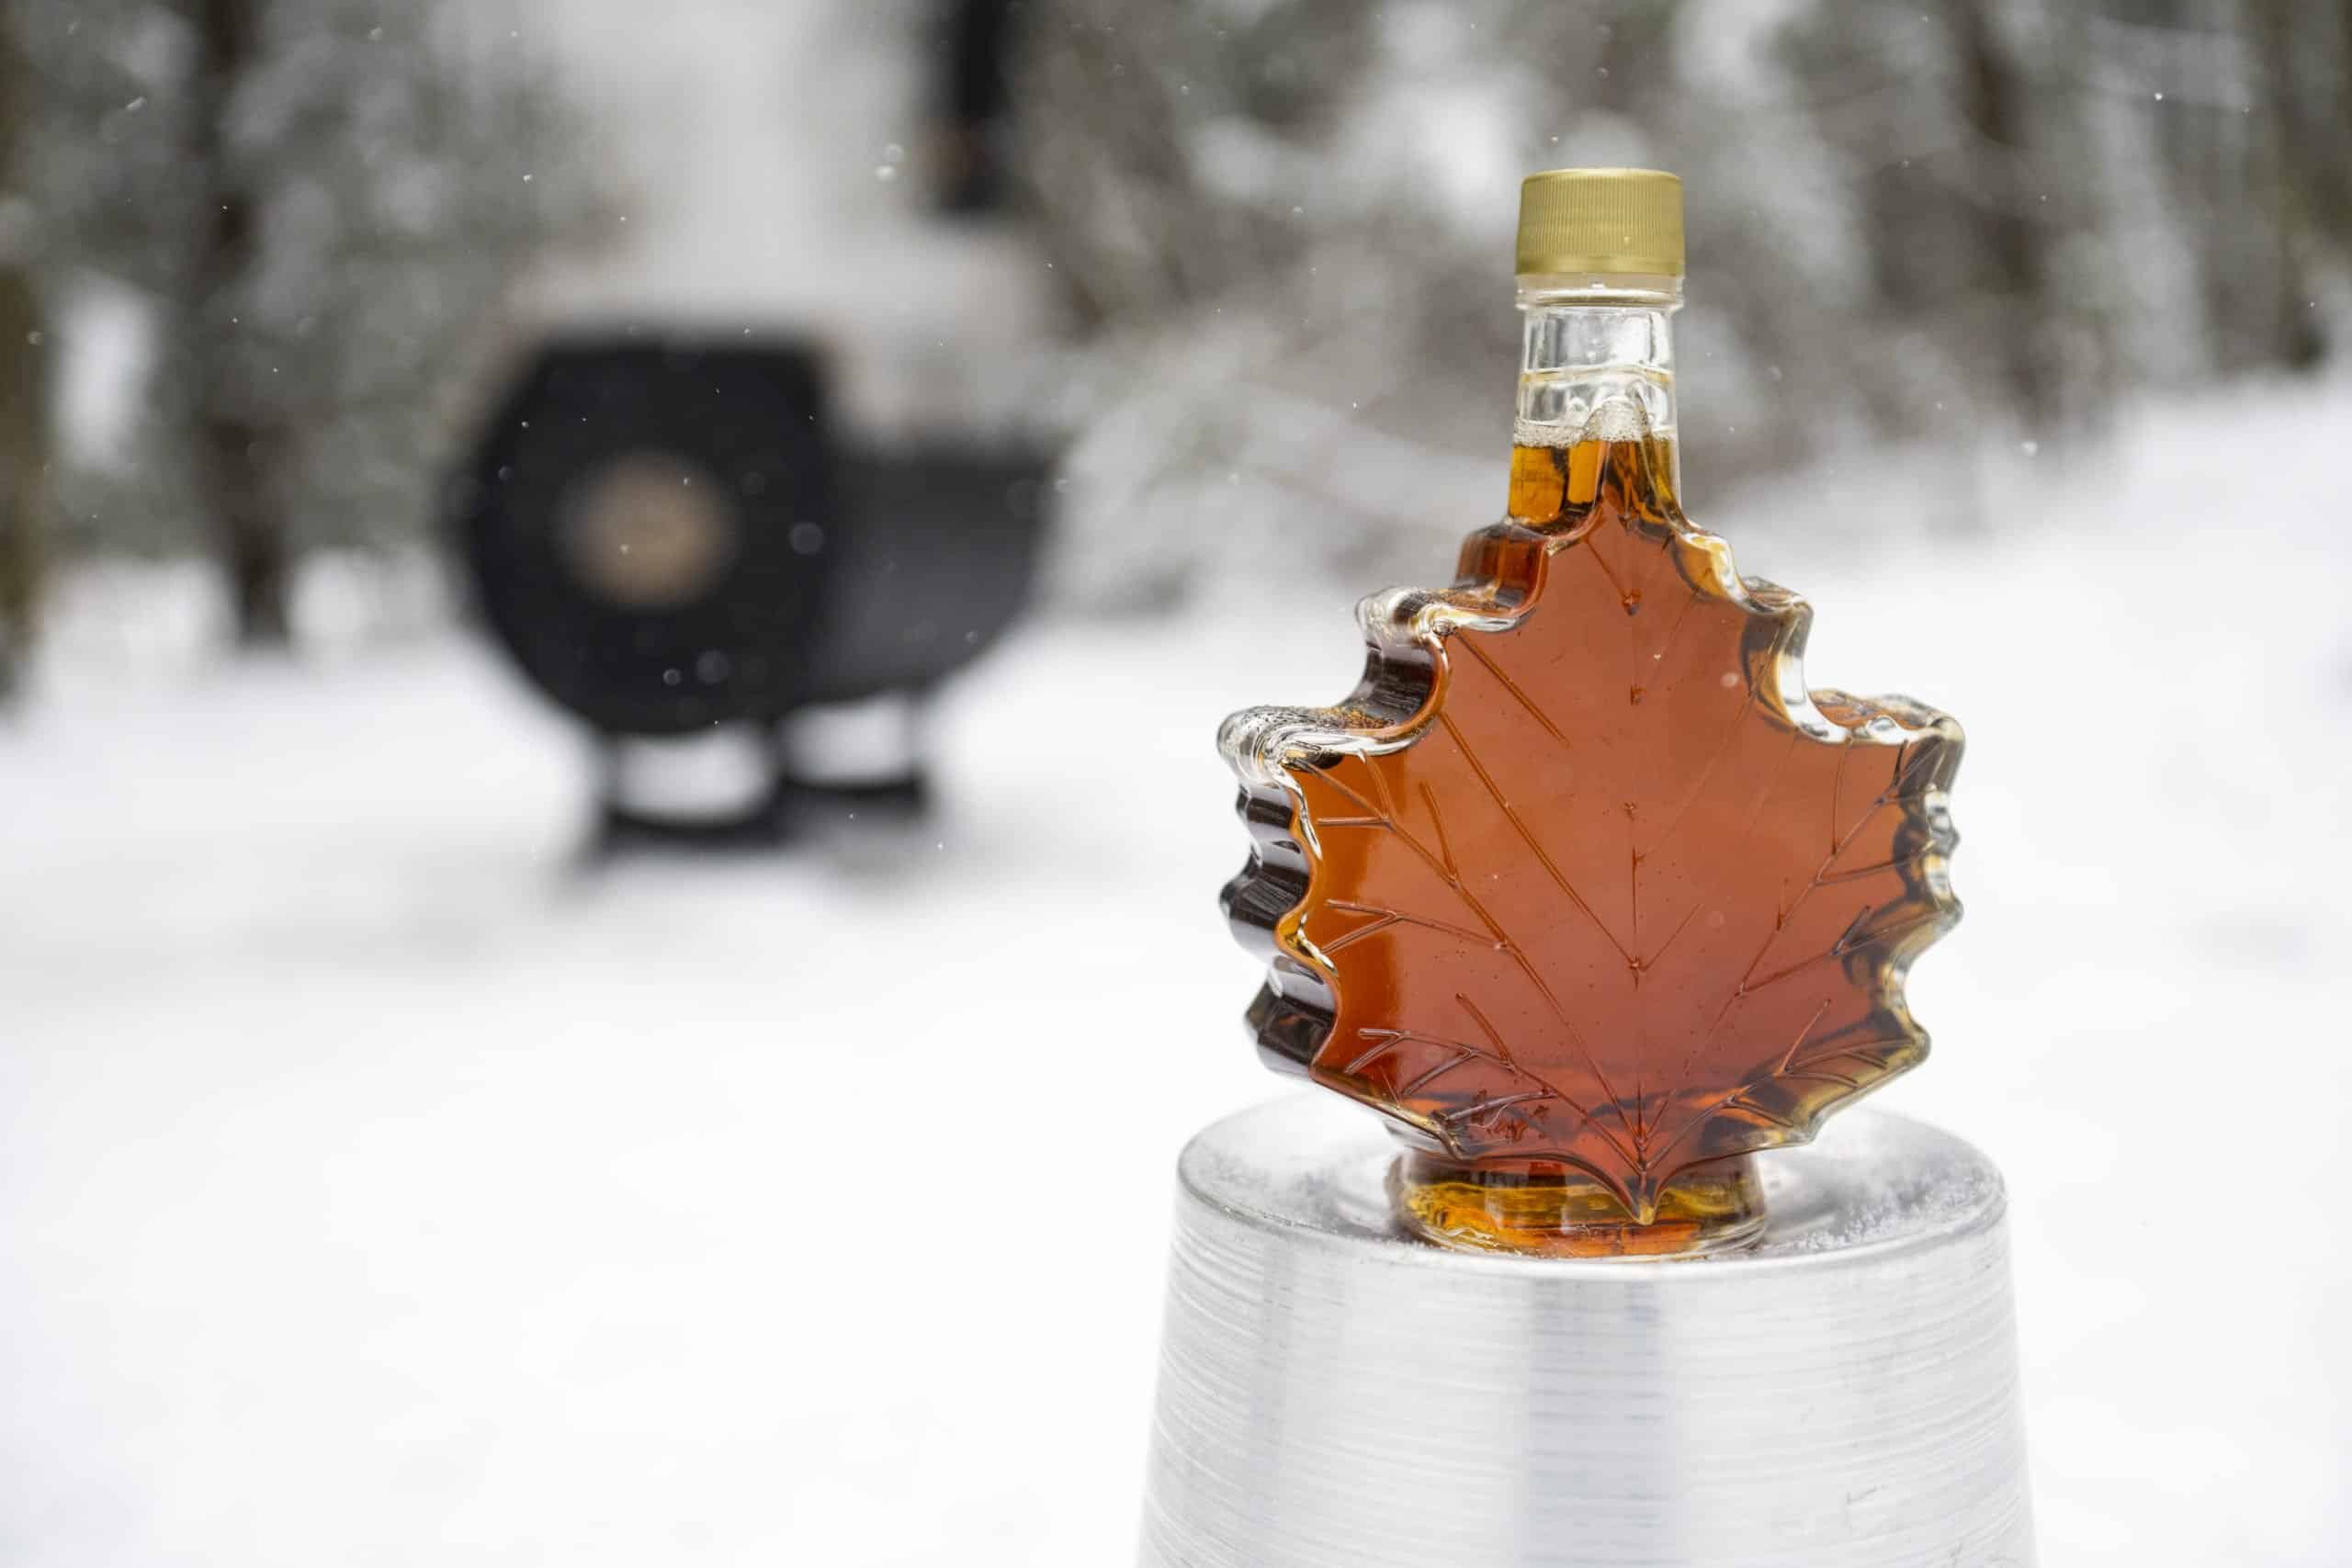 Maple leaf maple syrup bottle with maple syrup evaporator in the background